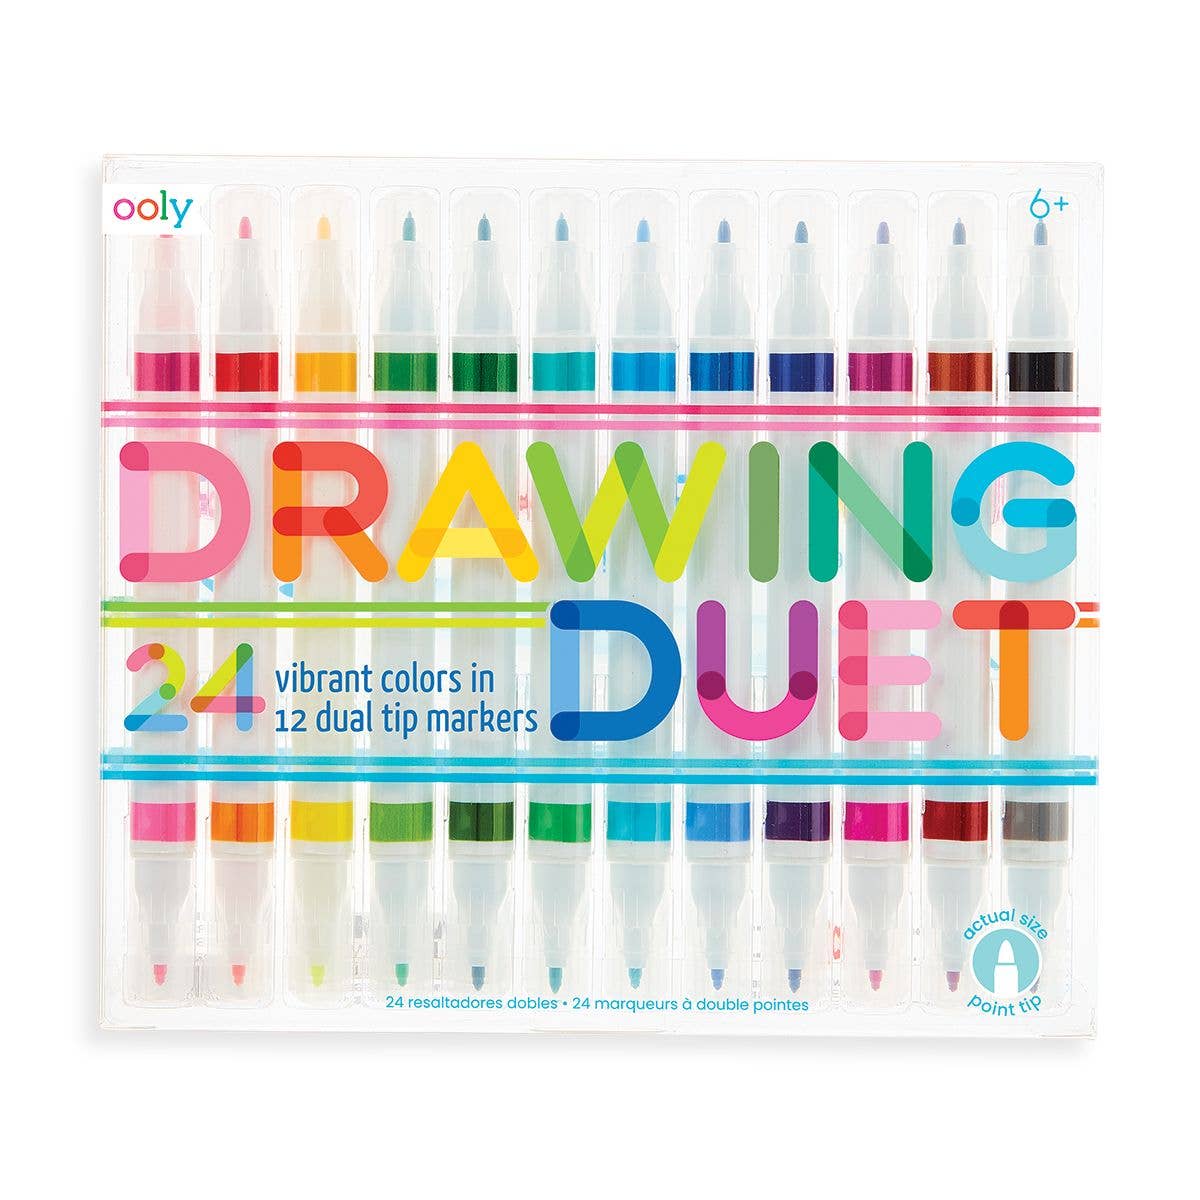 Ooly Dual Tone Double Ended Brush Marker Set